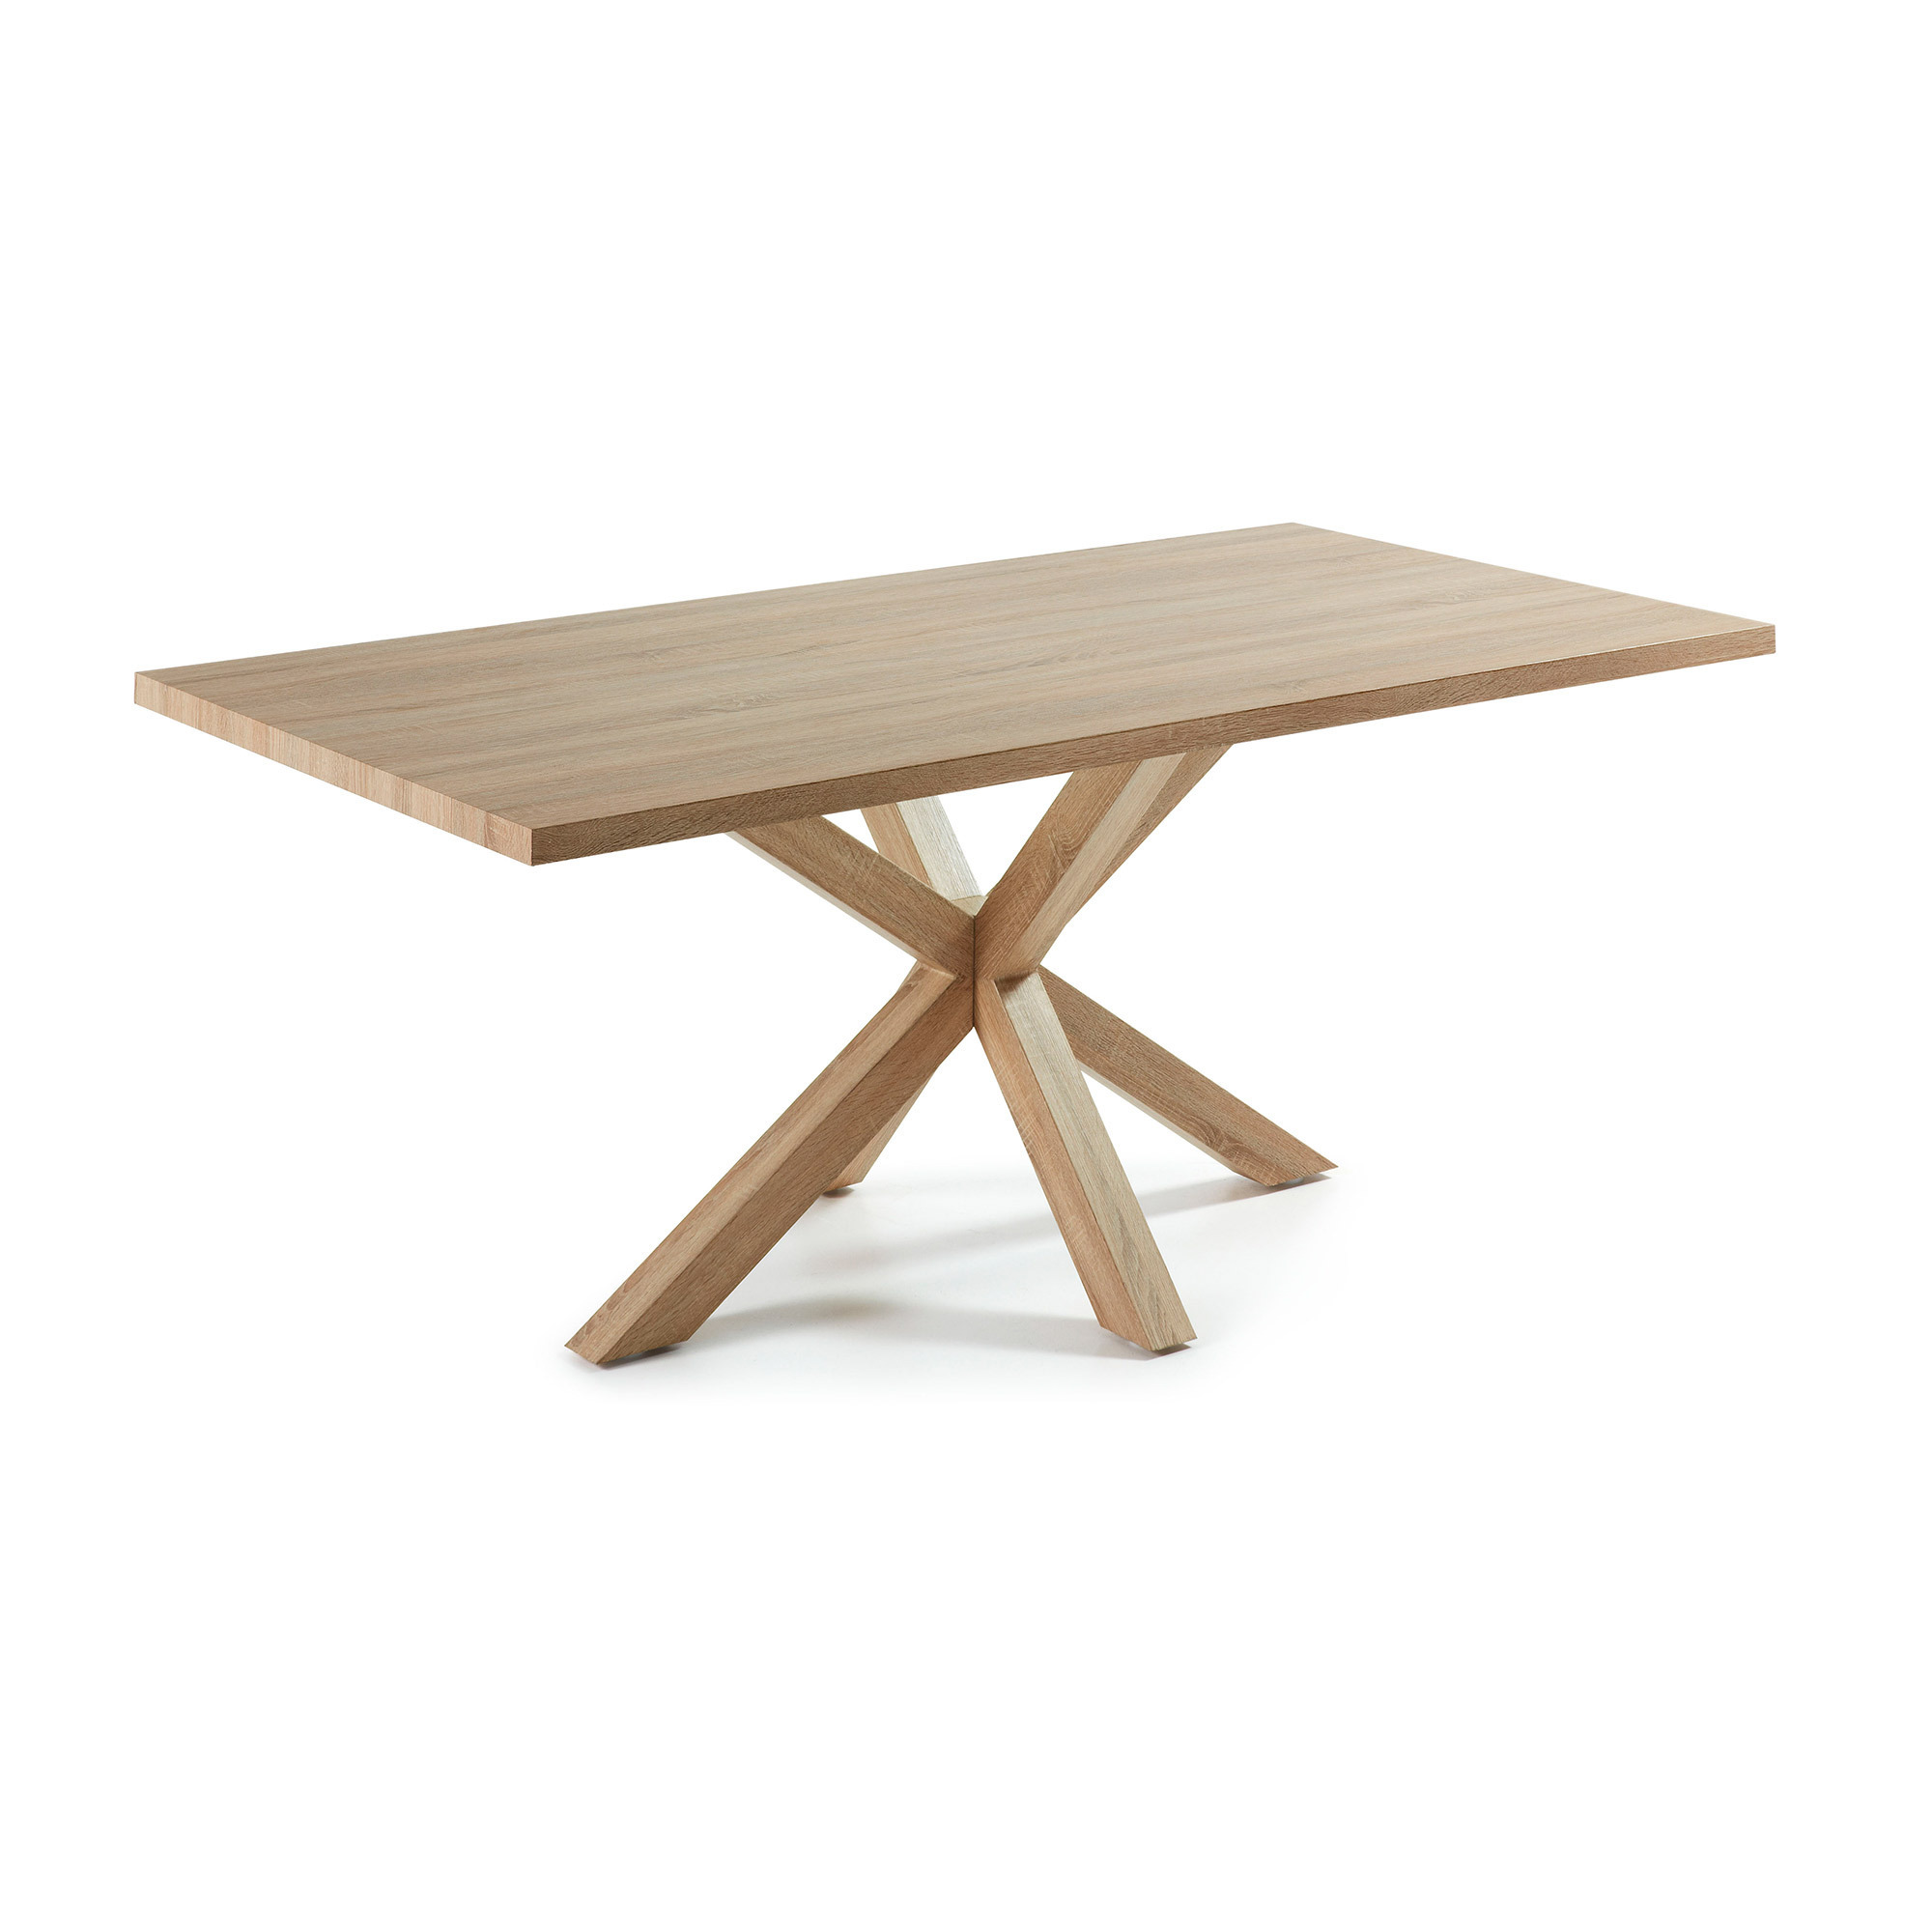 Argo table 200 x 100 cm natural melamine wood effect legs by Kave Home |  